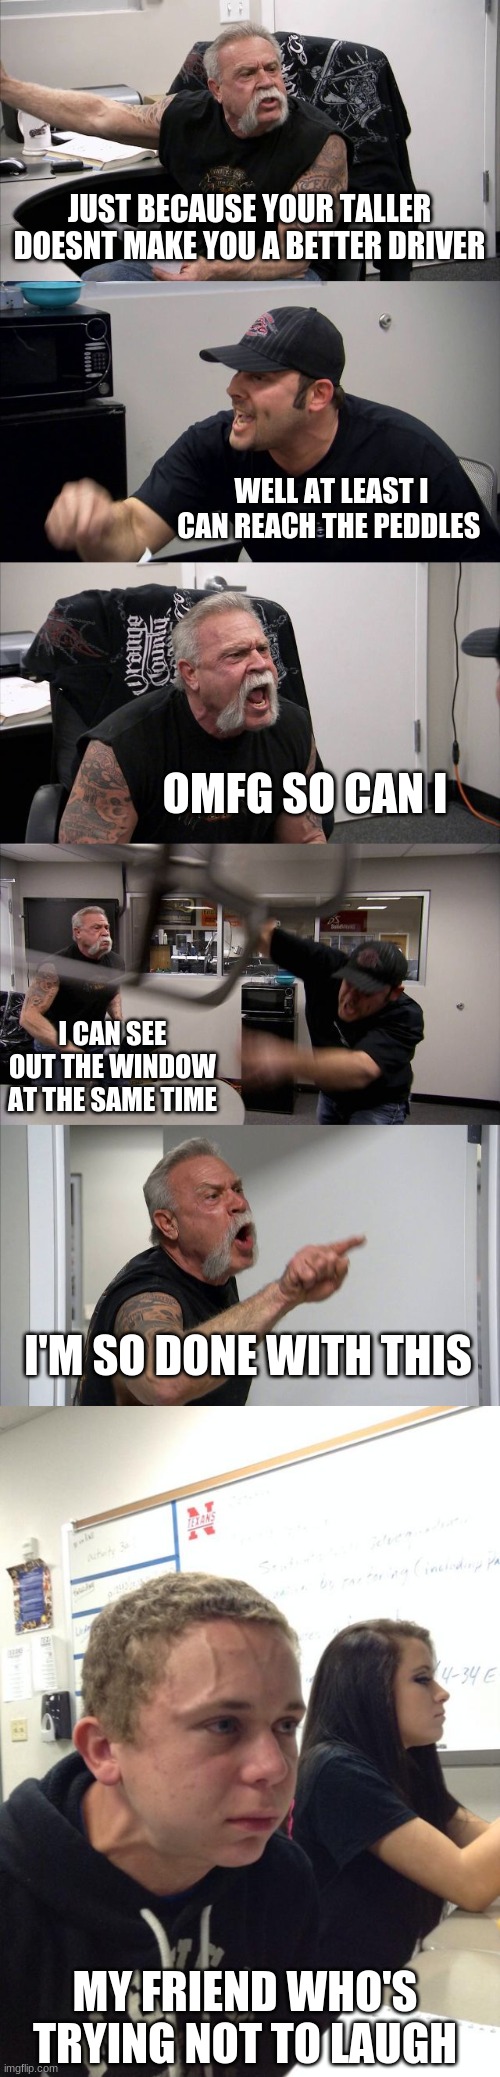 this was a real middle school conversation I had lmao | JUST BECAUSE YOUR TALLER DOESNT MAKE YOU A BETTER DRIVER; WELL AT LEAST I CAN REACH THE PEDDLES; OMFG SO CAN I; I CAN SEE OUT THE WINDOW AT THE SAME TIME; I'M SO DONE WITH THIS; MY FRIEND WHO'S TRYING NOT TO LAUGH | image tagged in memes,american chopper argument,hold fart | made w/ Imgflip meme maker